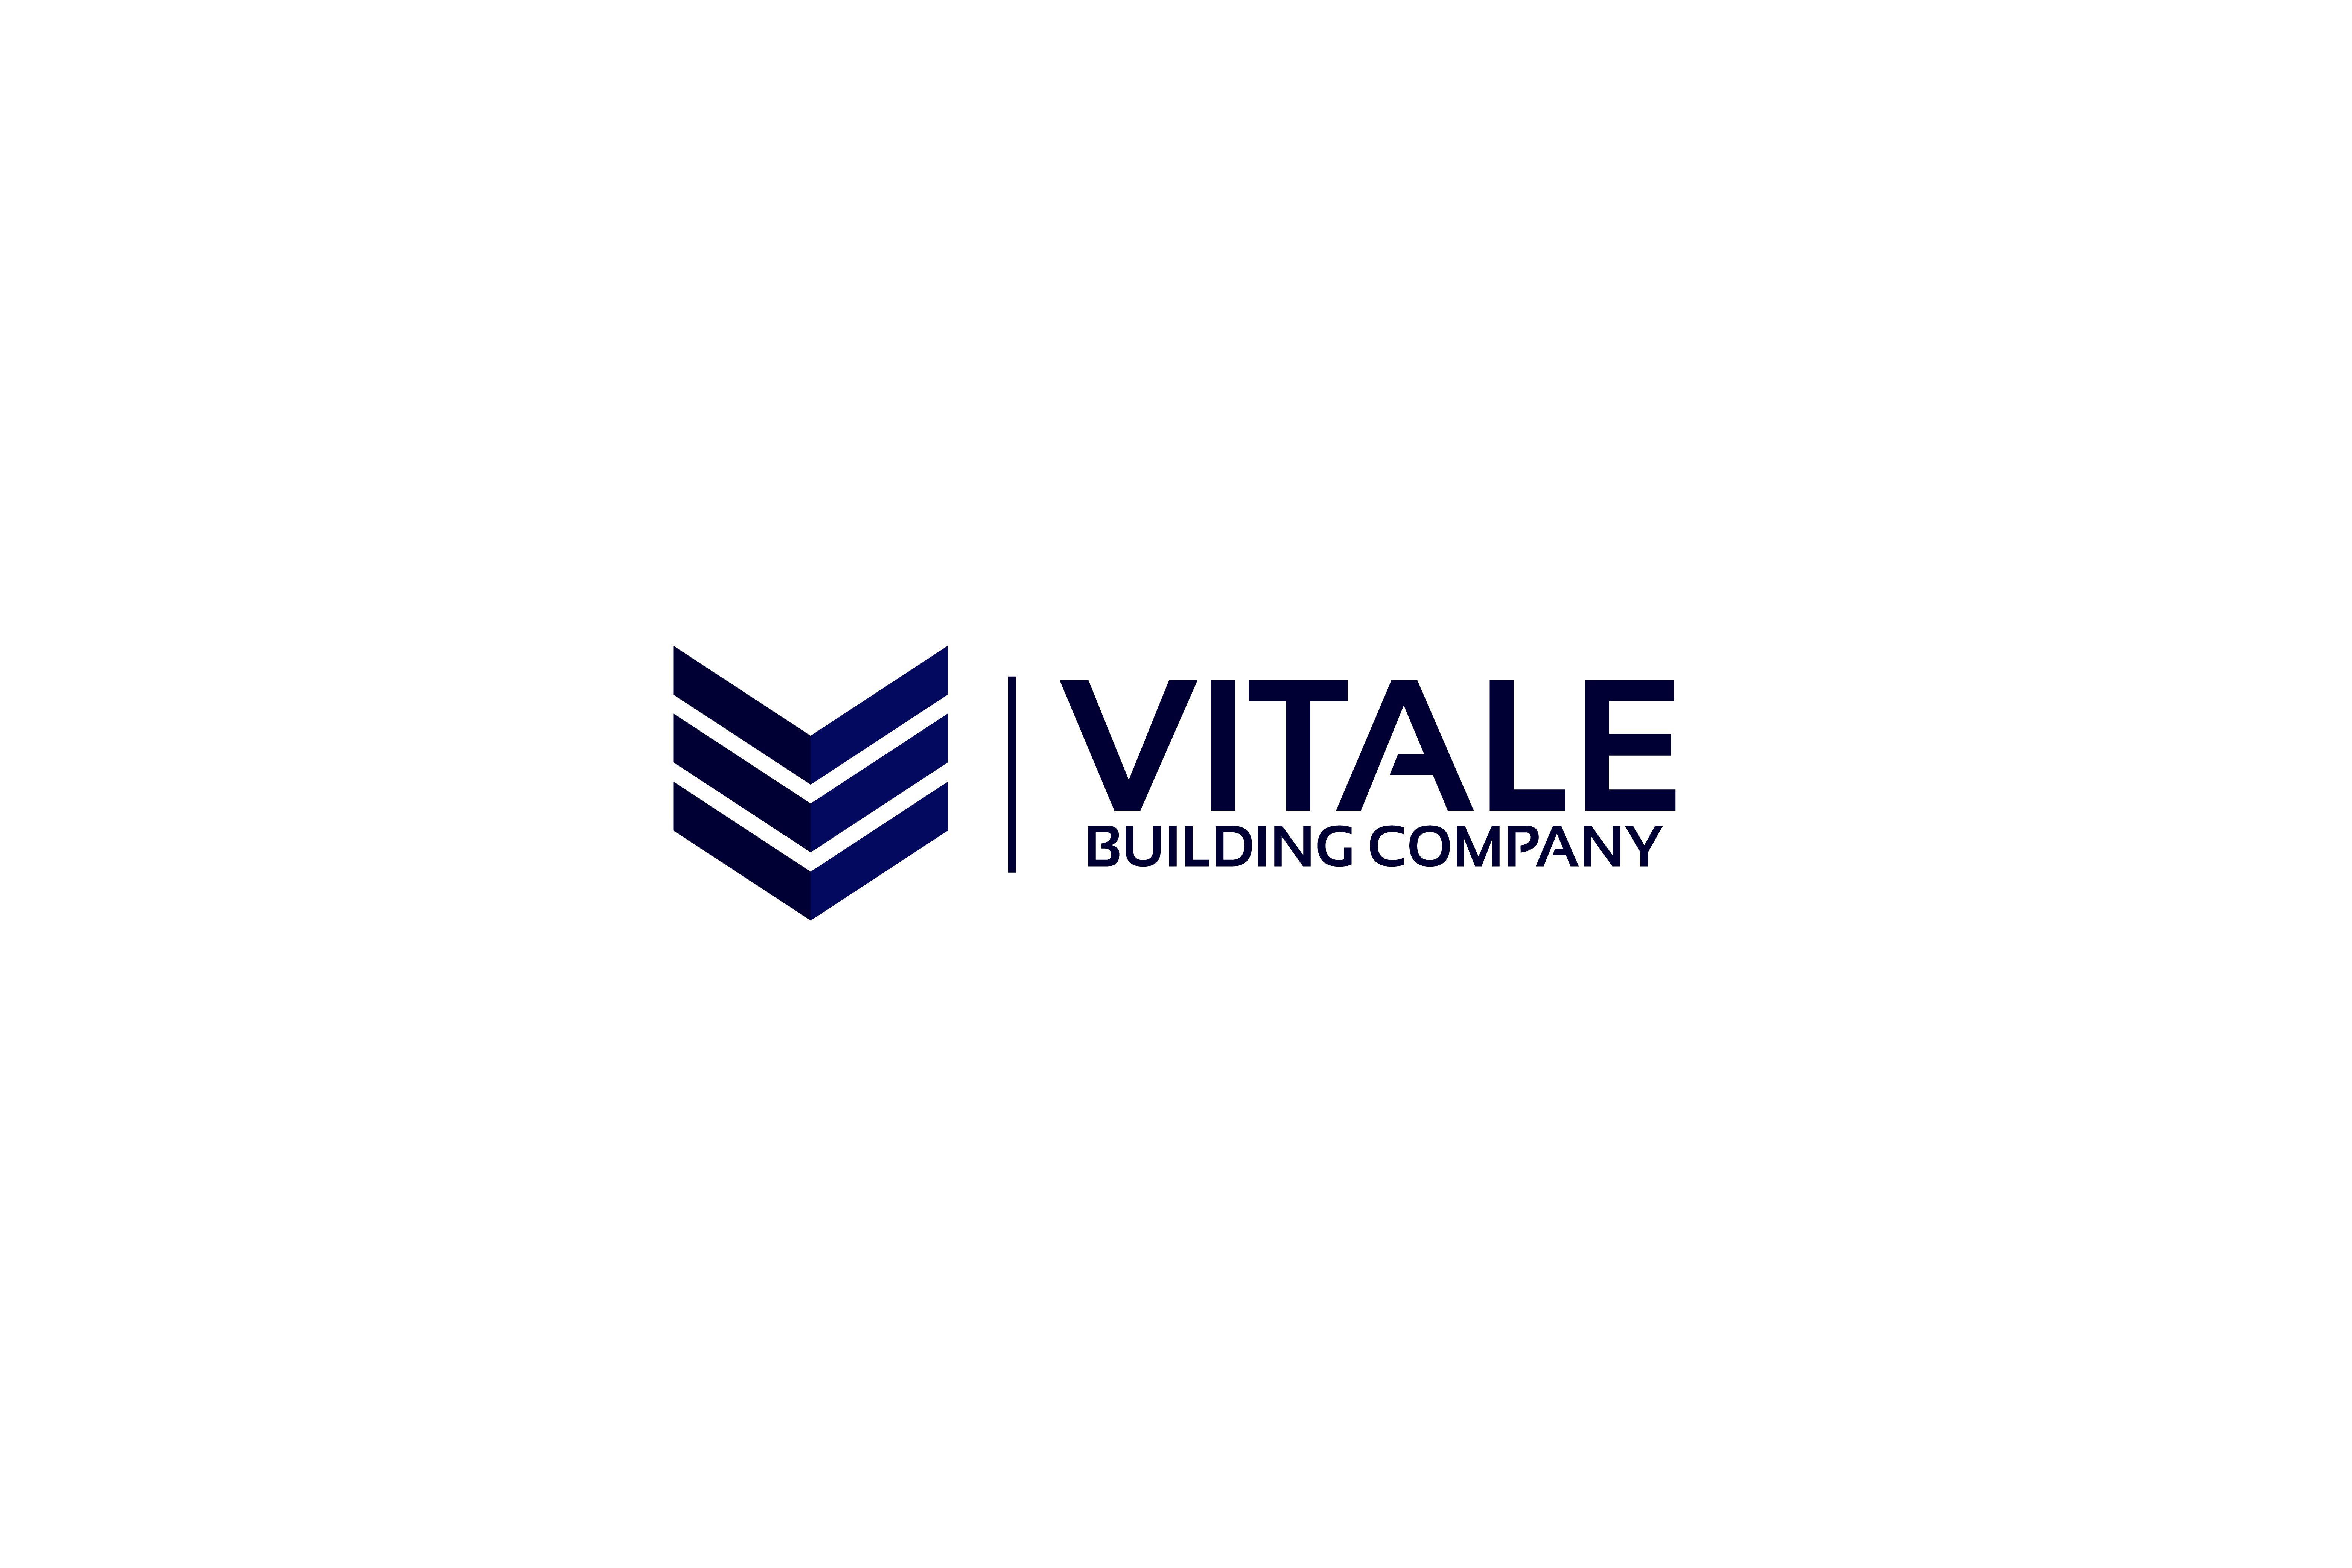 Building Company Logo - Vitale Building Company – Let's Build Together